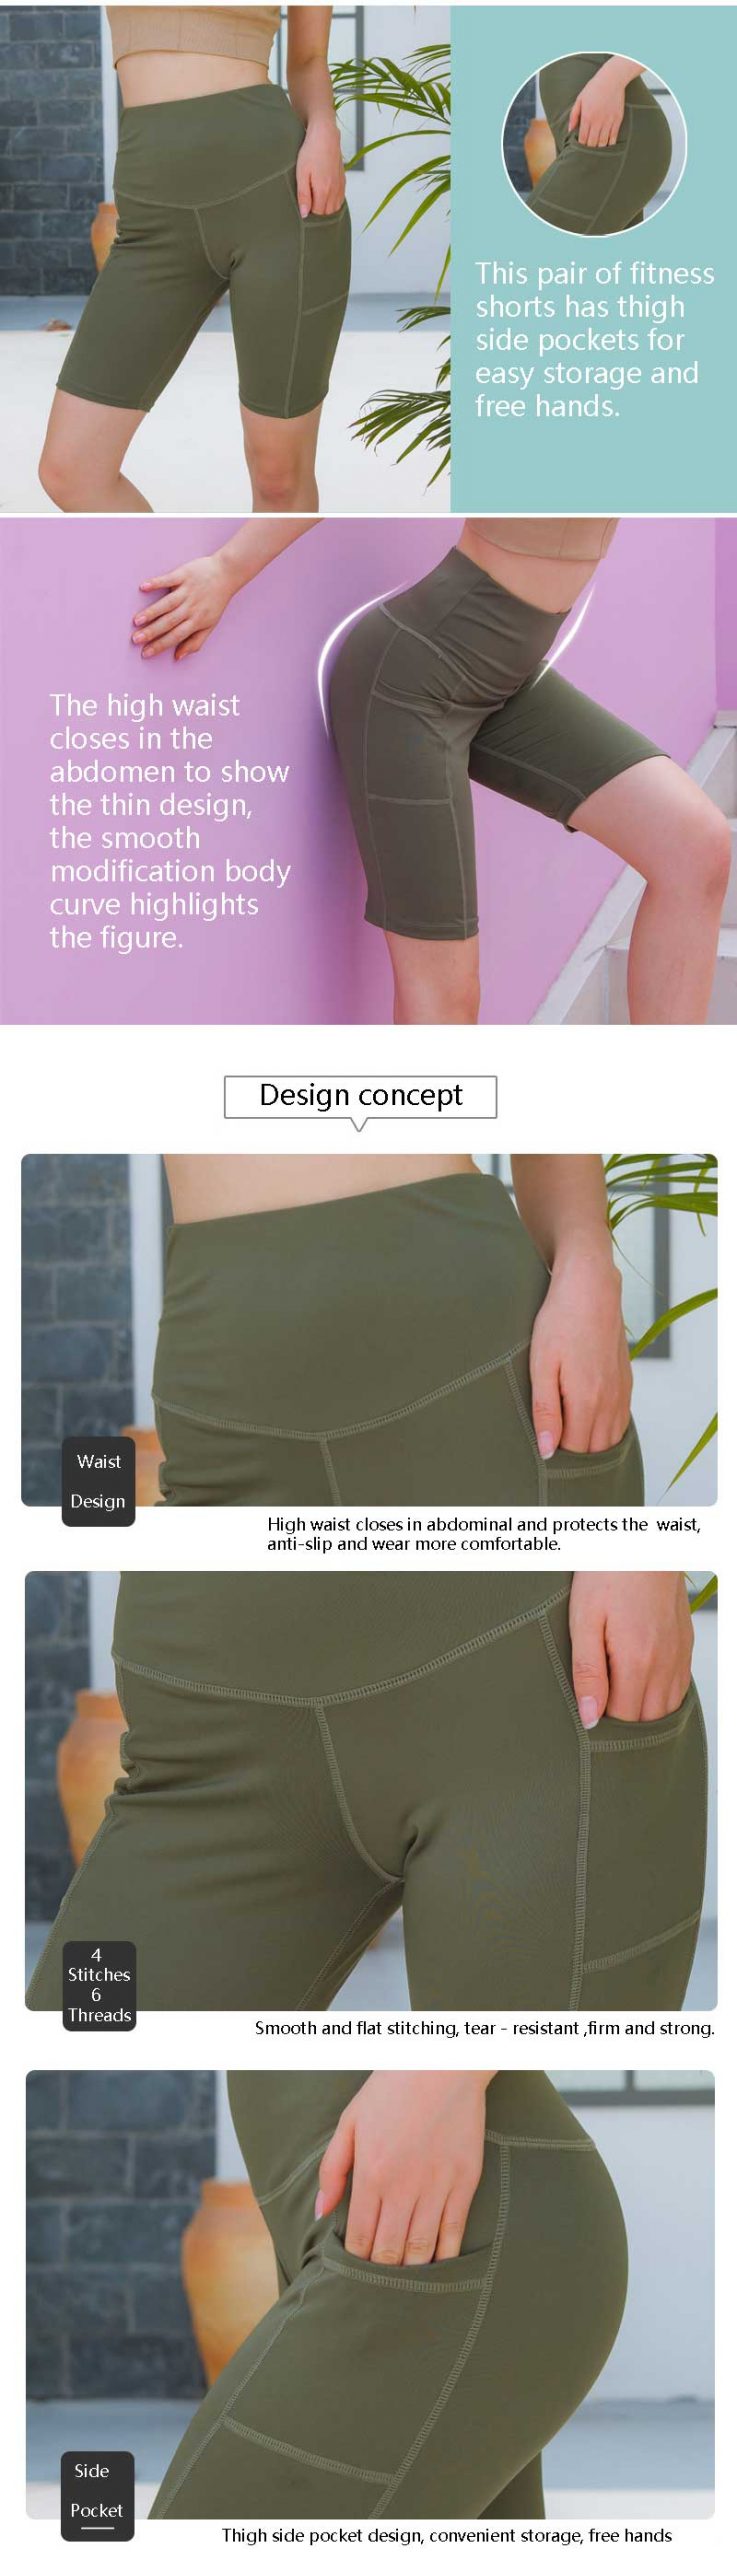 Running shorts with phone pocket design concepts